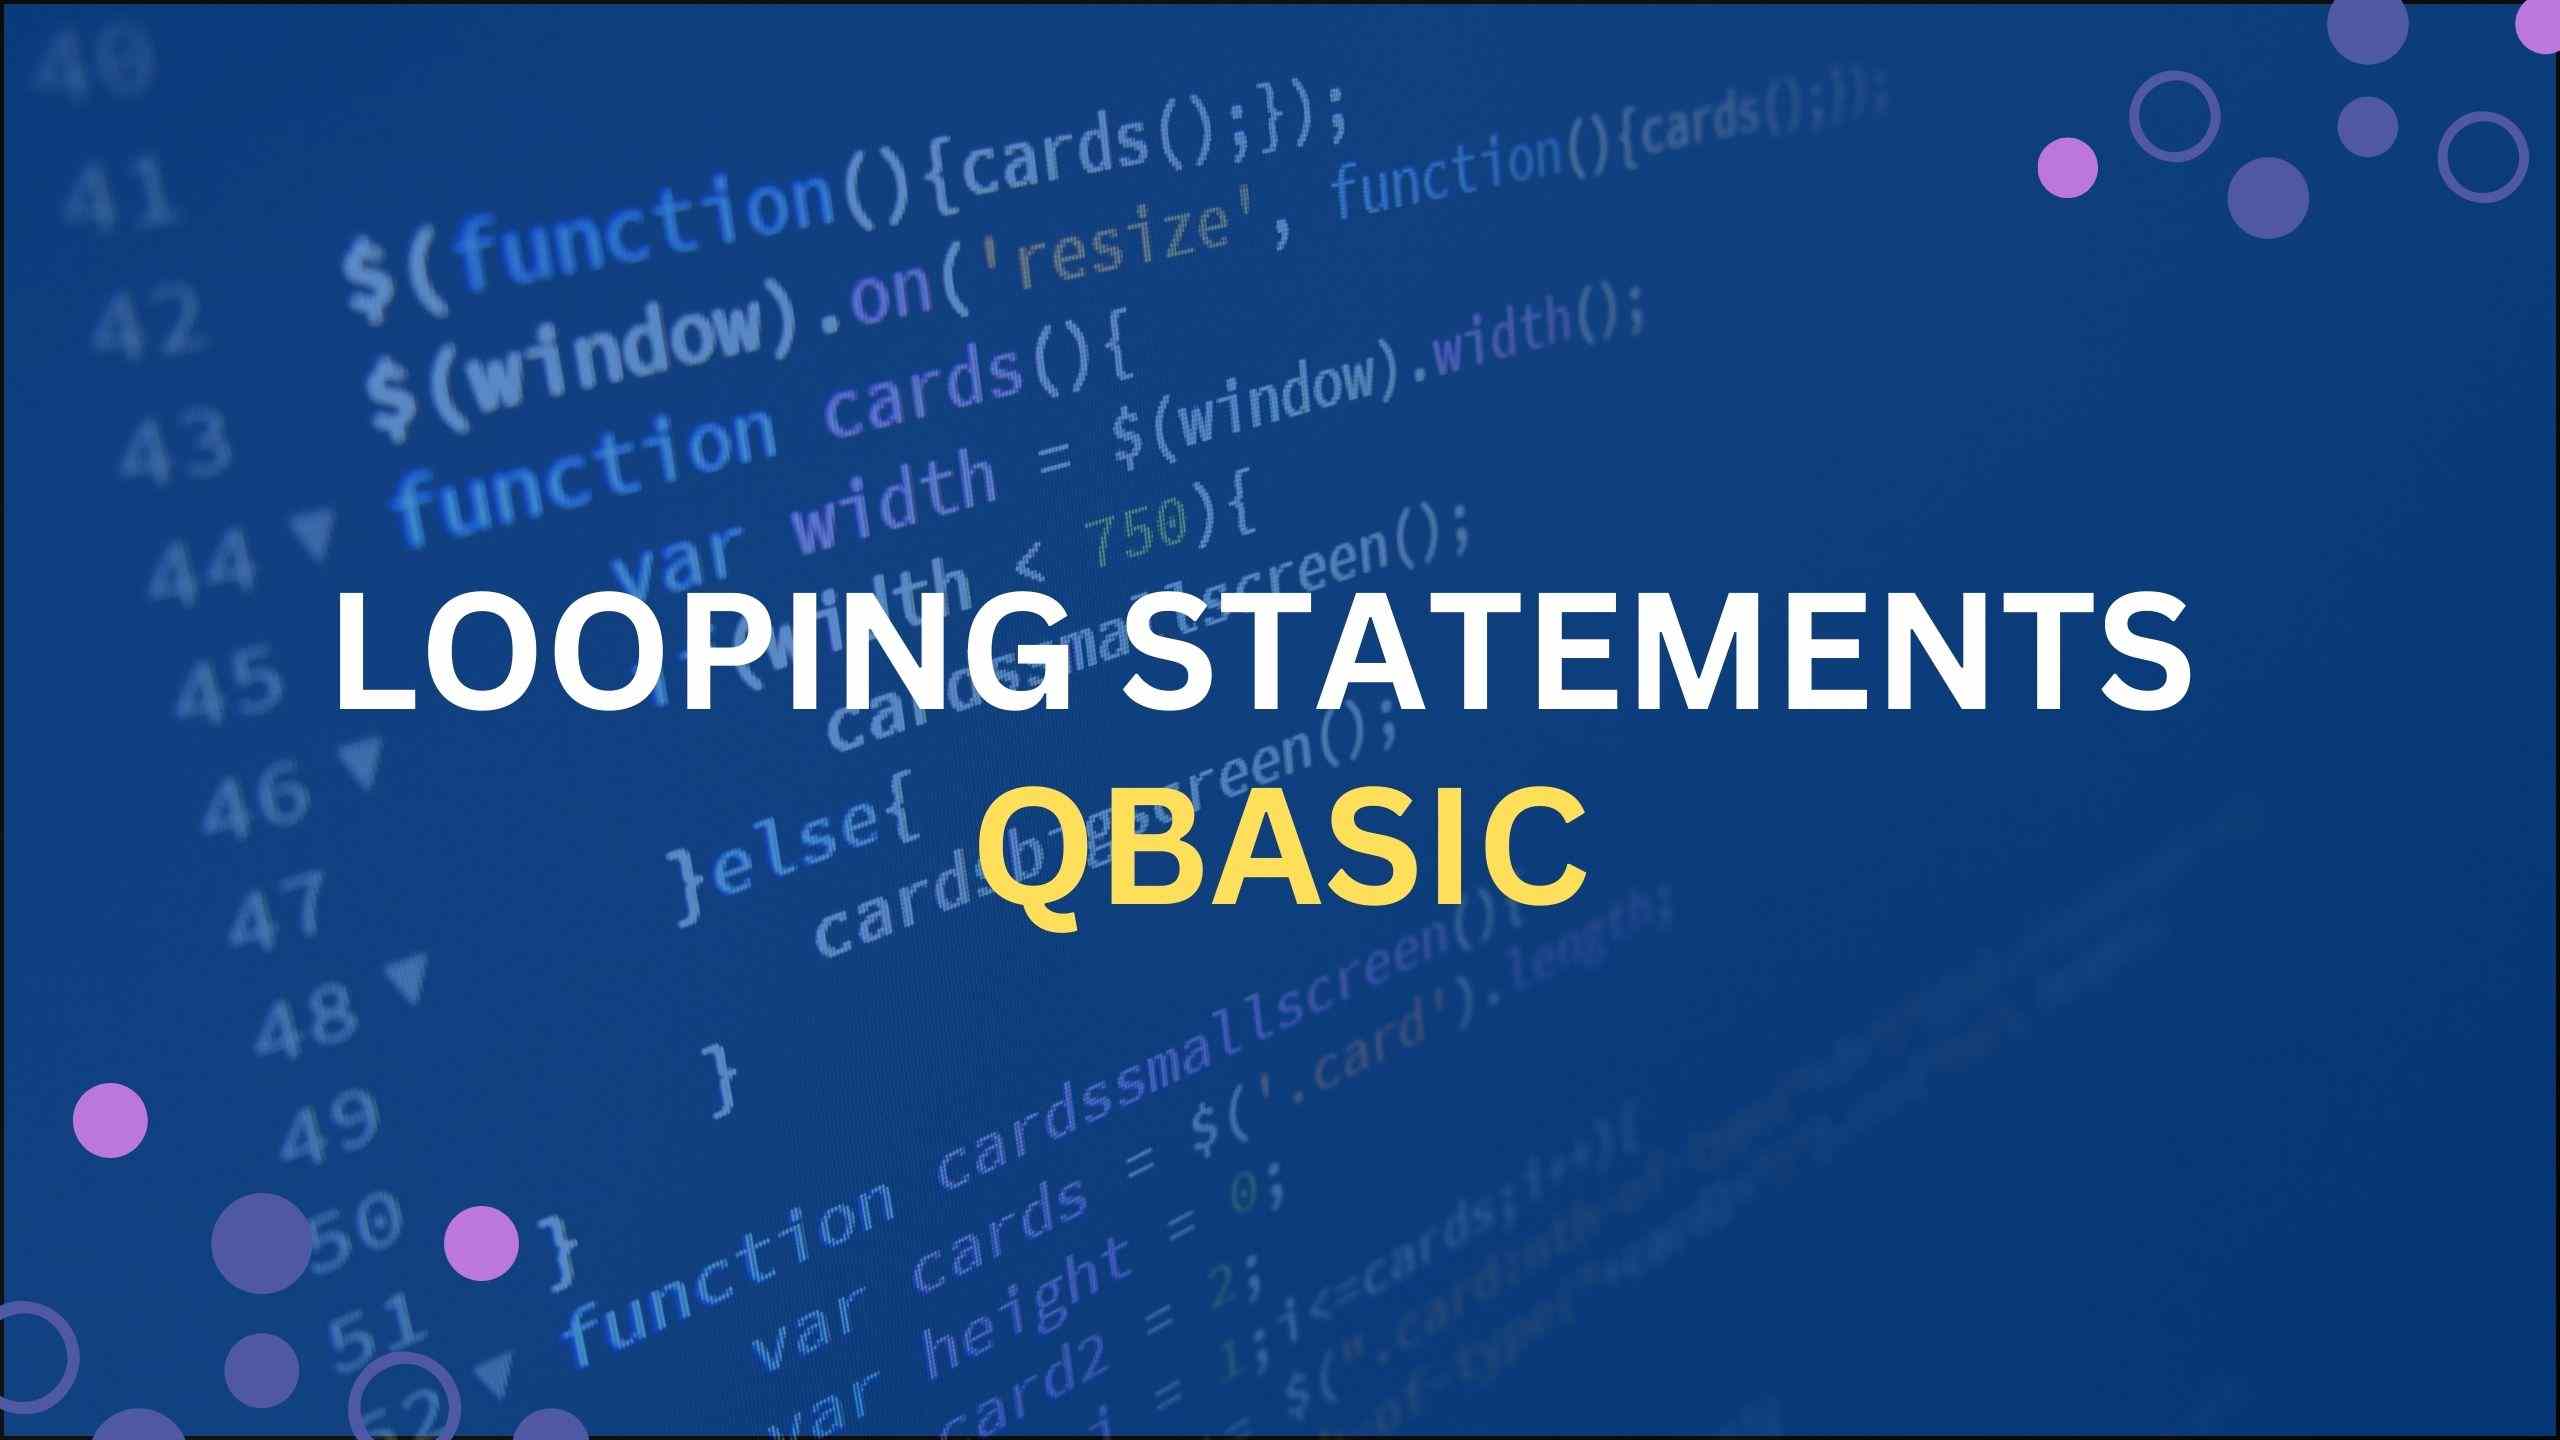 Qbasic Looping statements with Examples